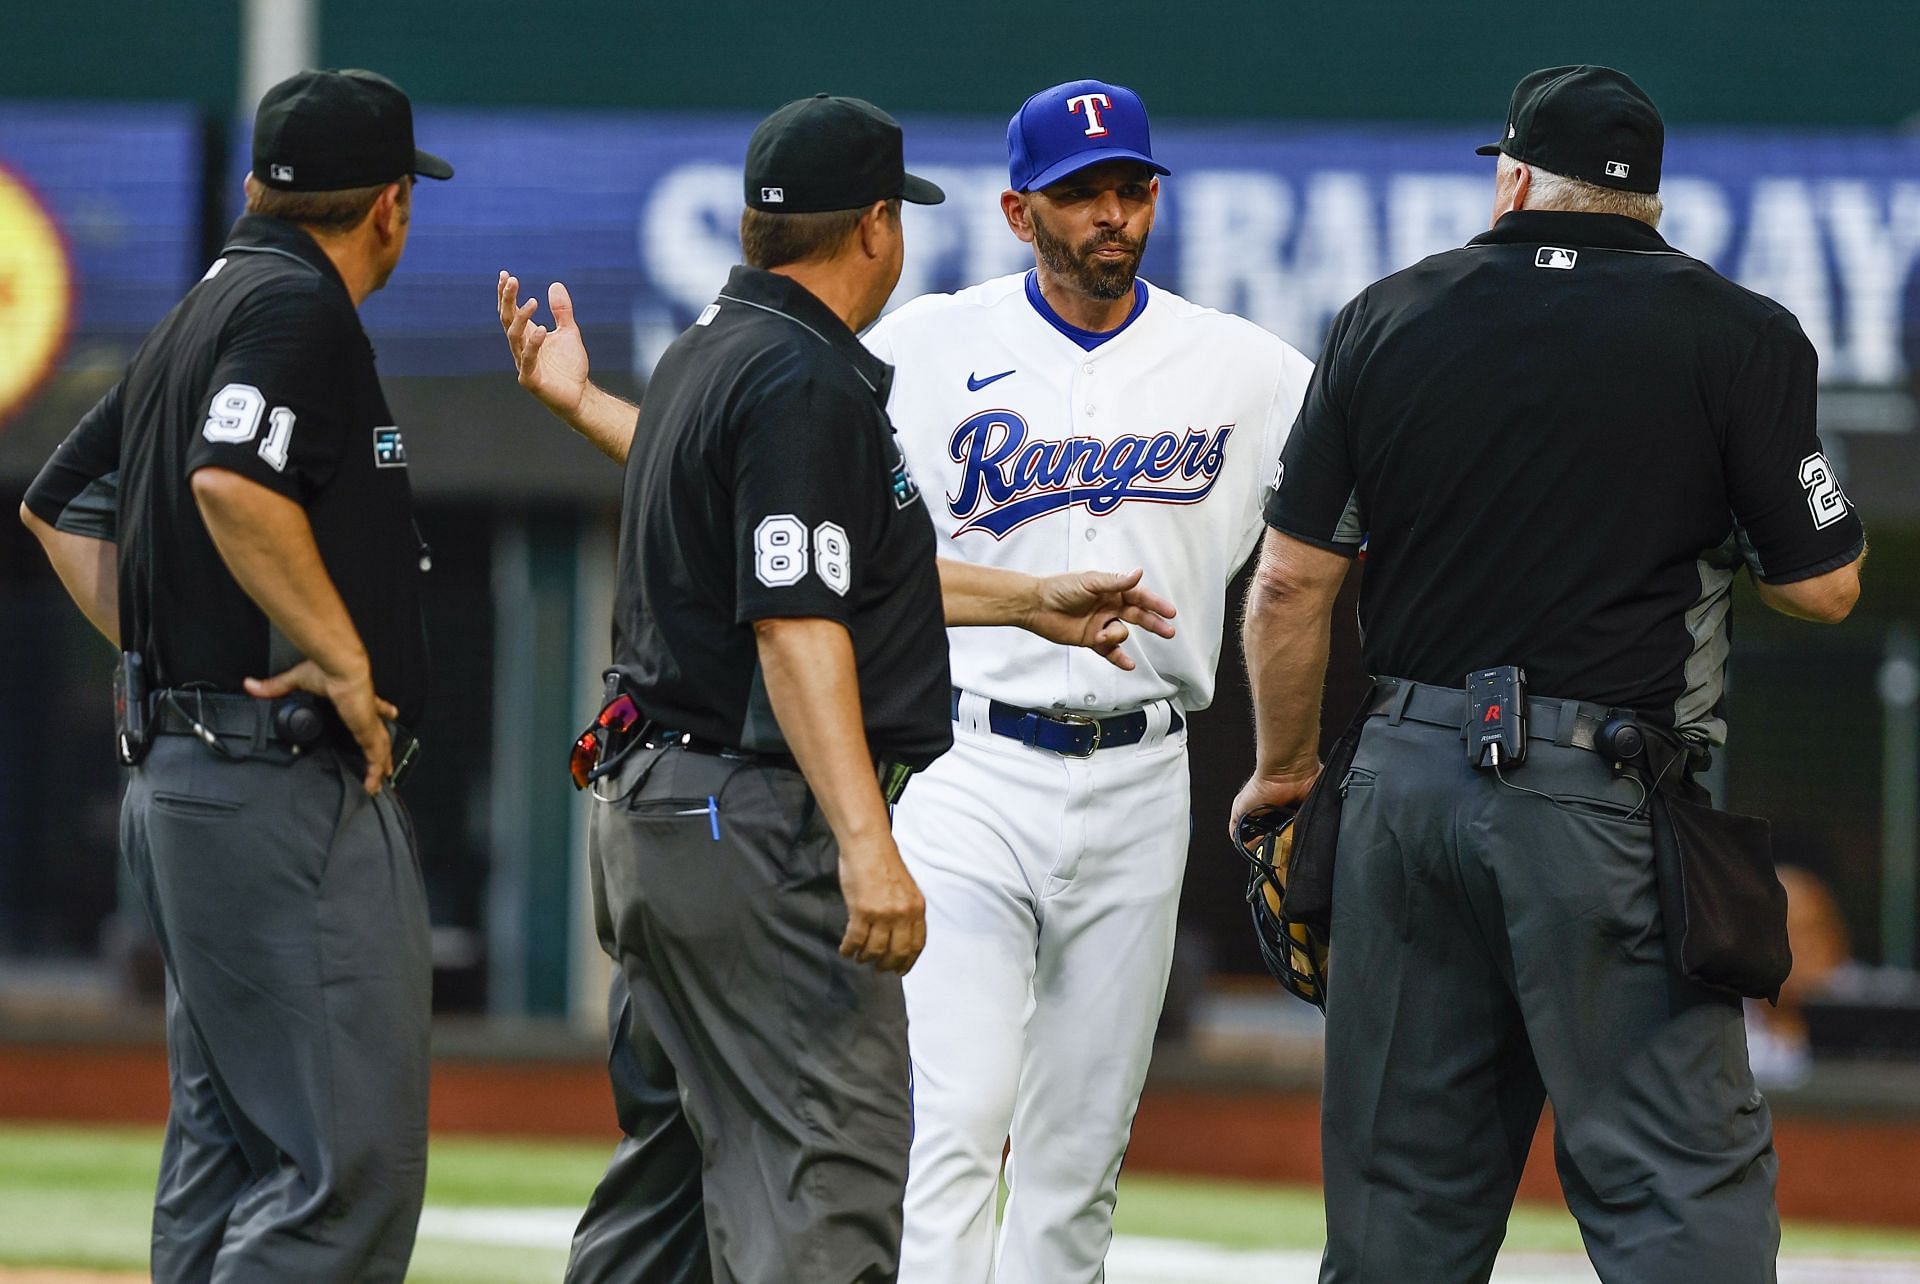 Texas Rangers fire manager Chris Woodward for team's underperformance - CGTN